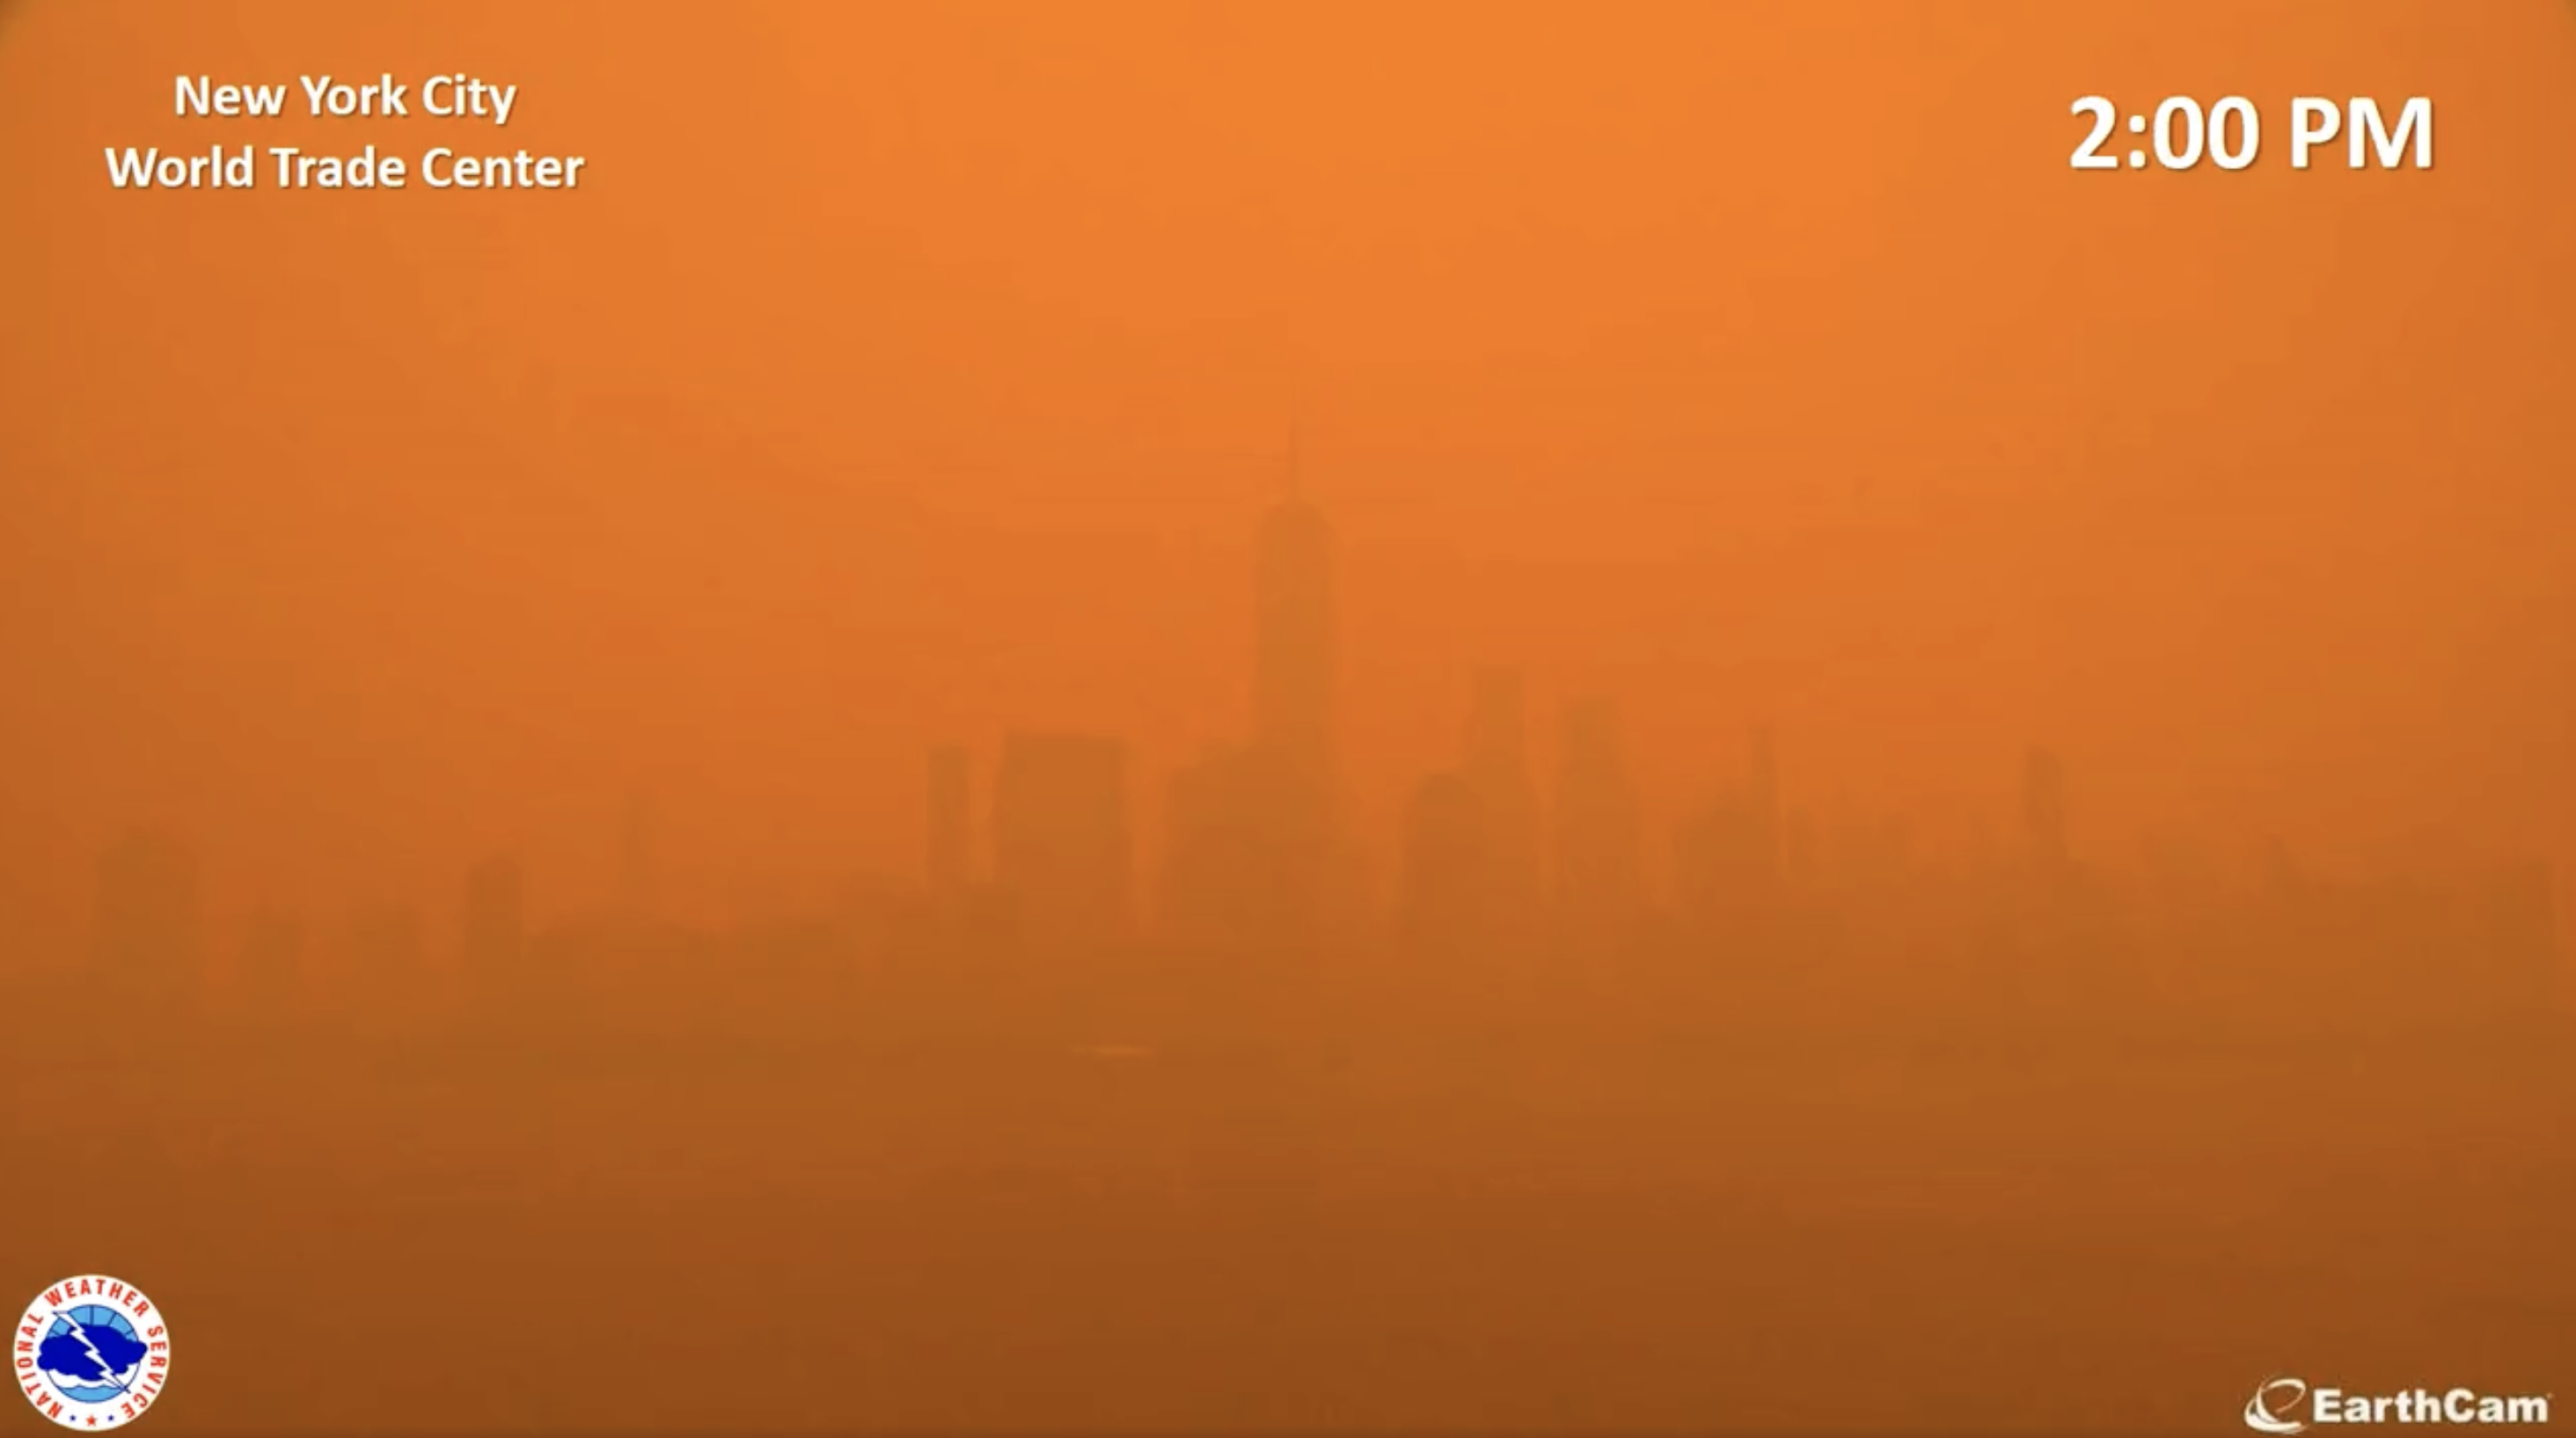 View of the downtown Manhattan skyline at 1:45 pm, with the sky an orange-red